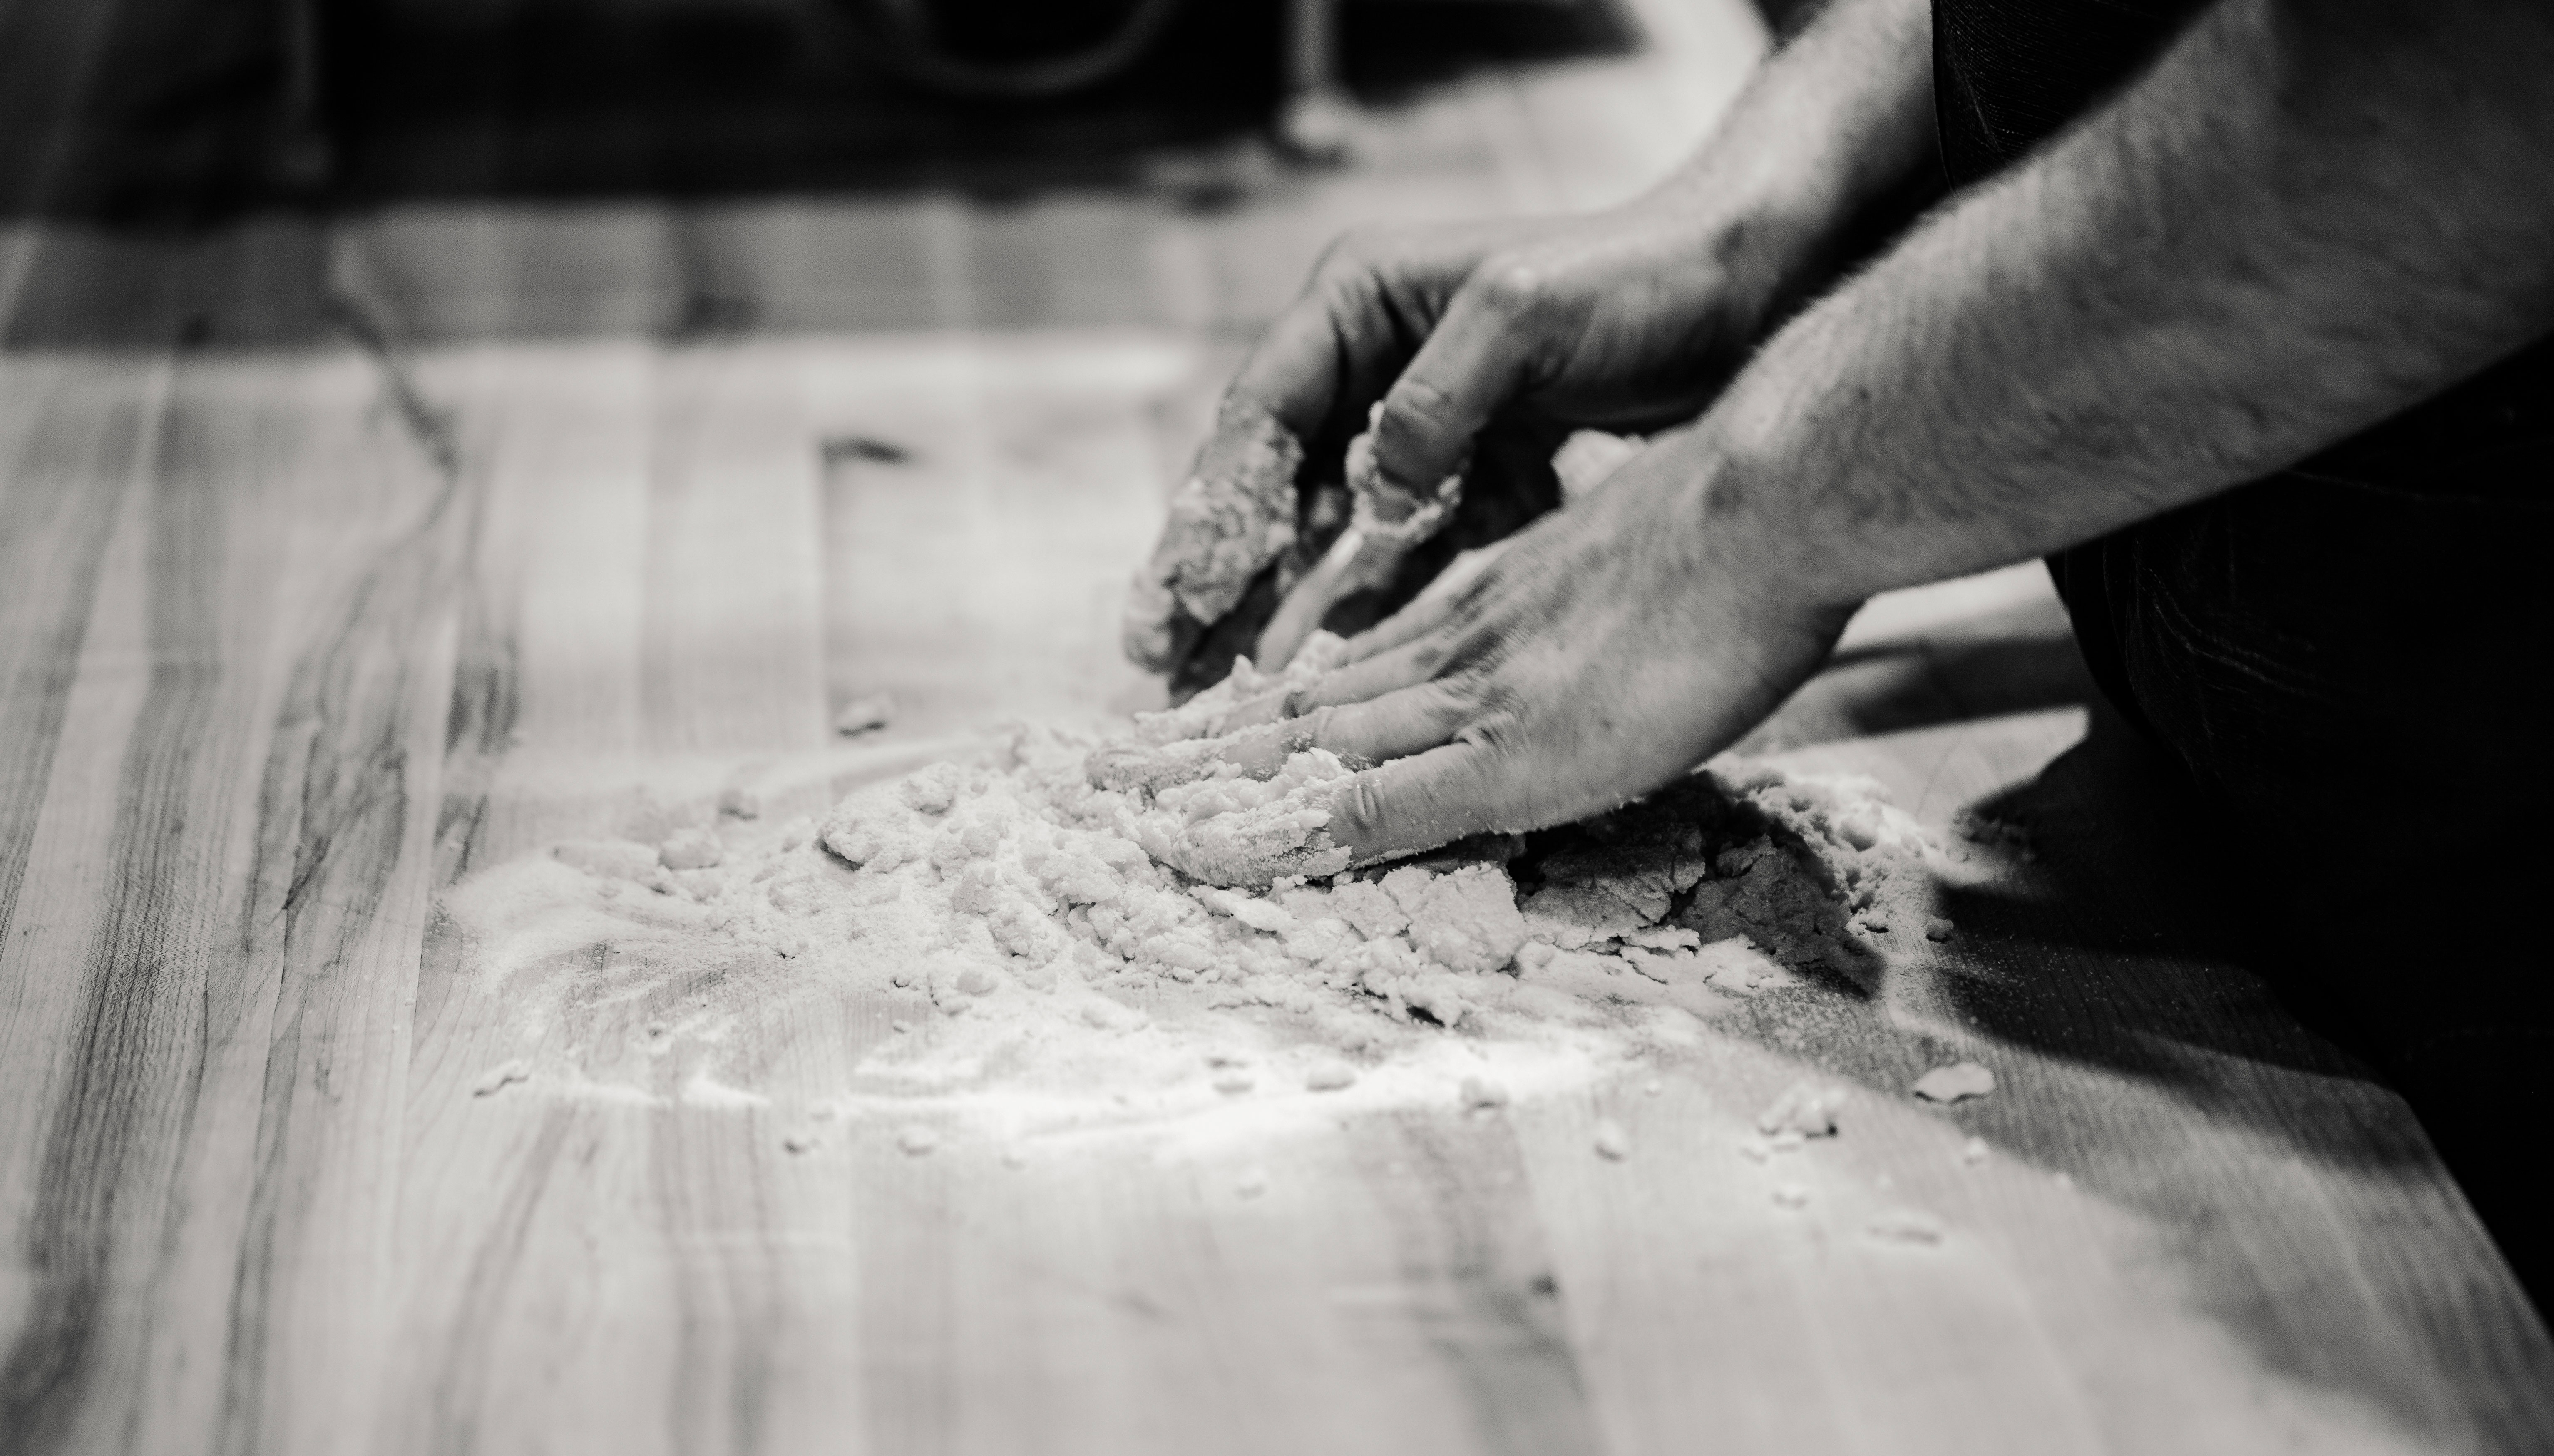 Authentic pasta making classes in downtown Fort Worth, Texas